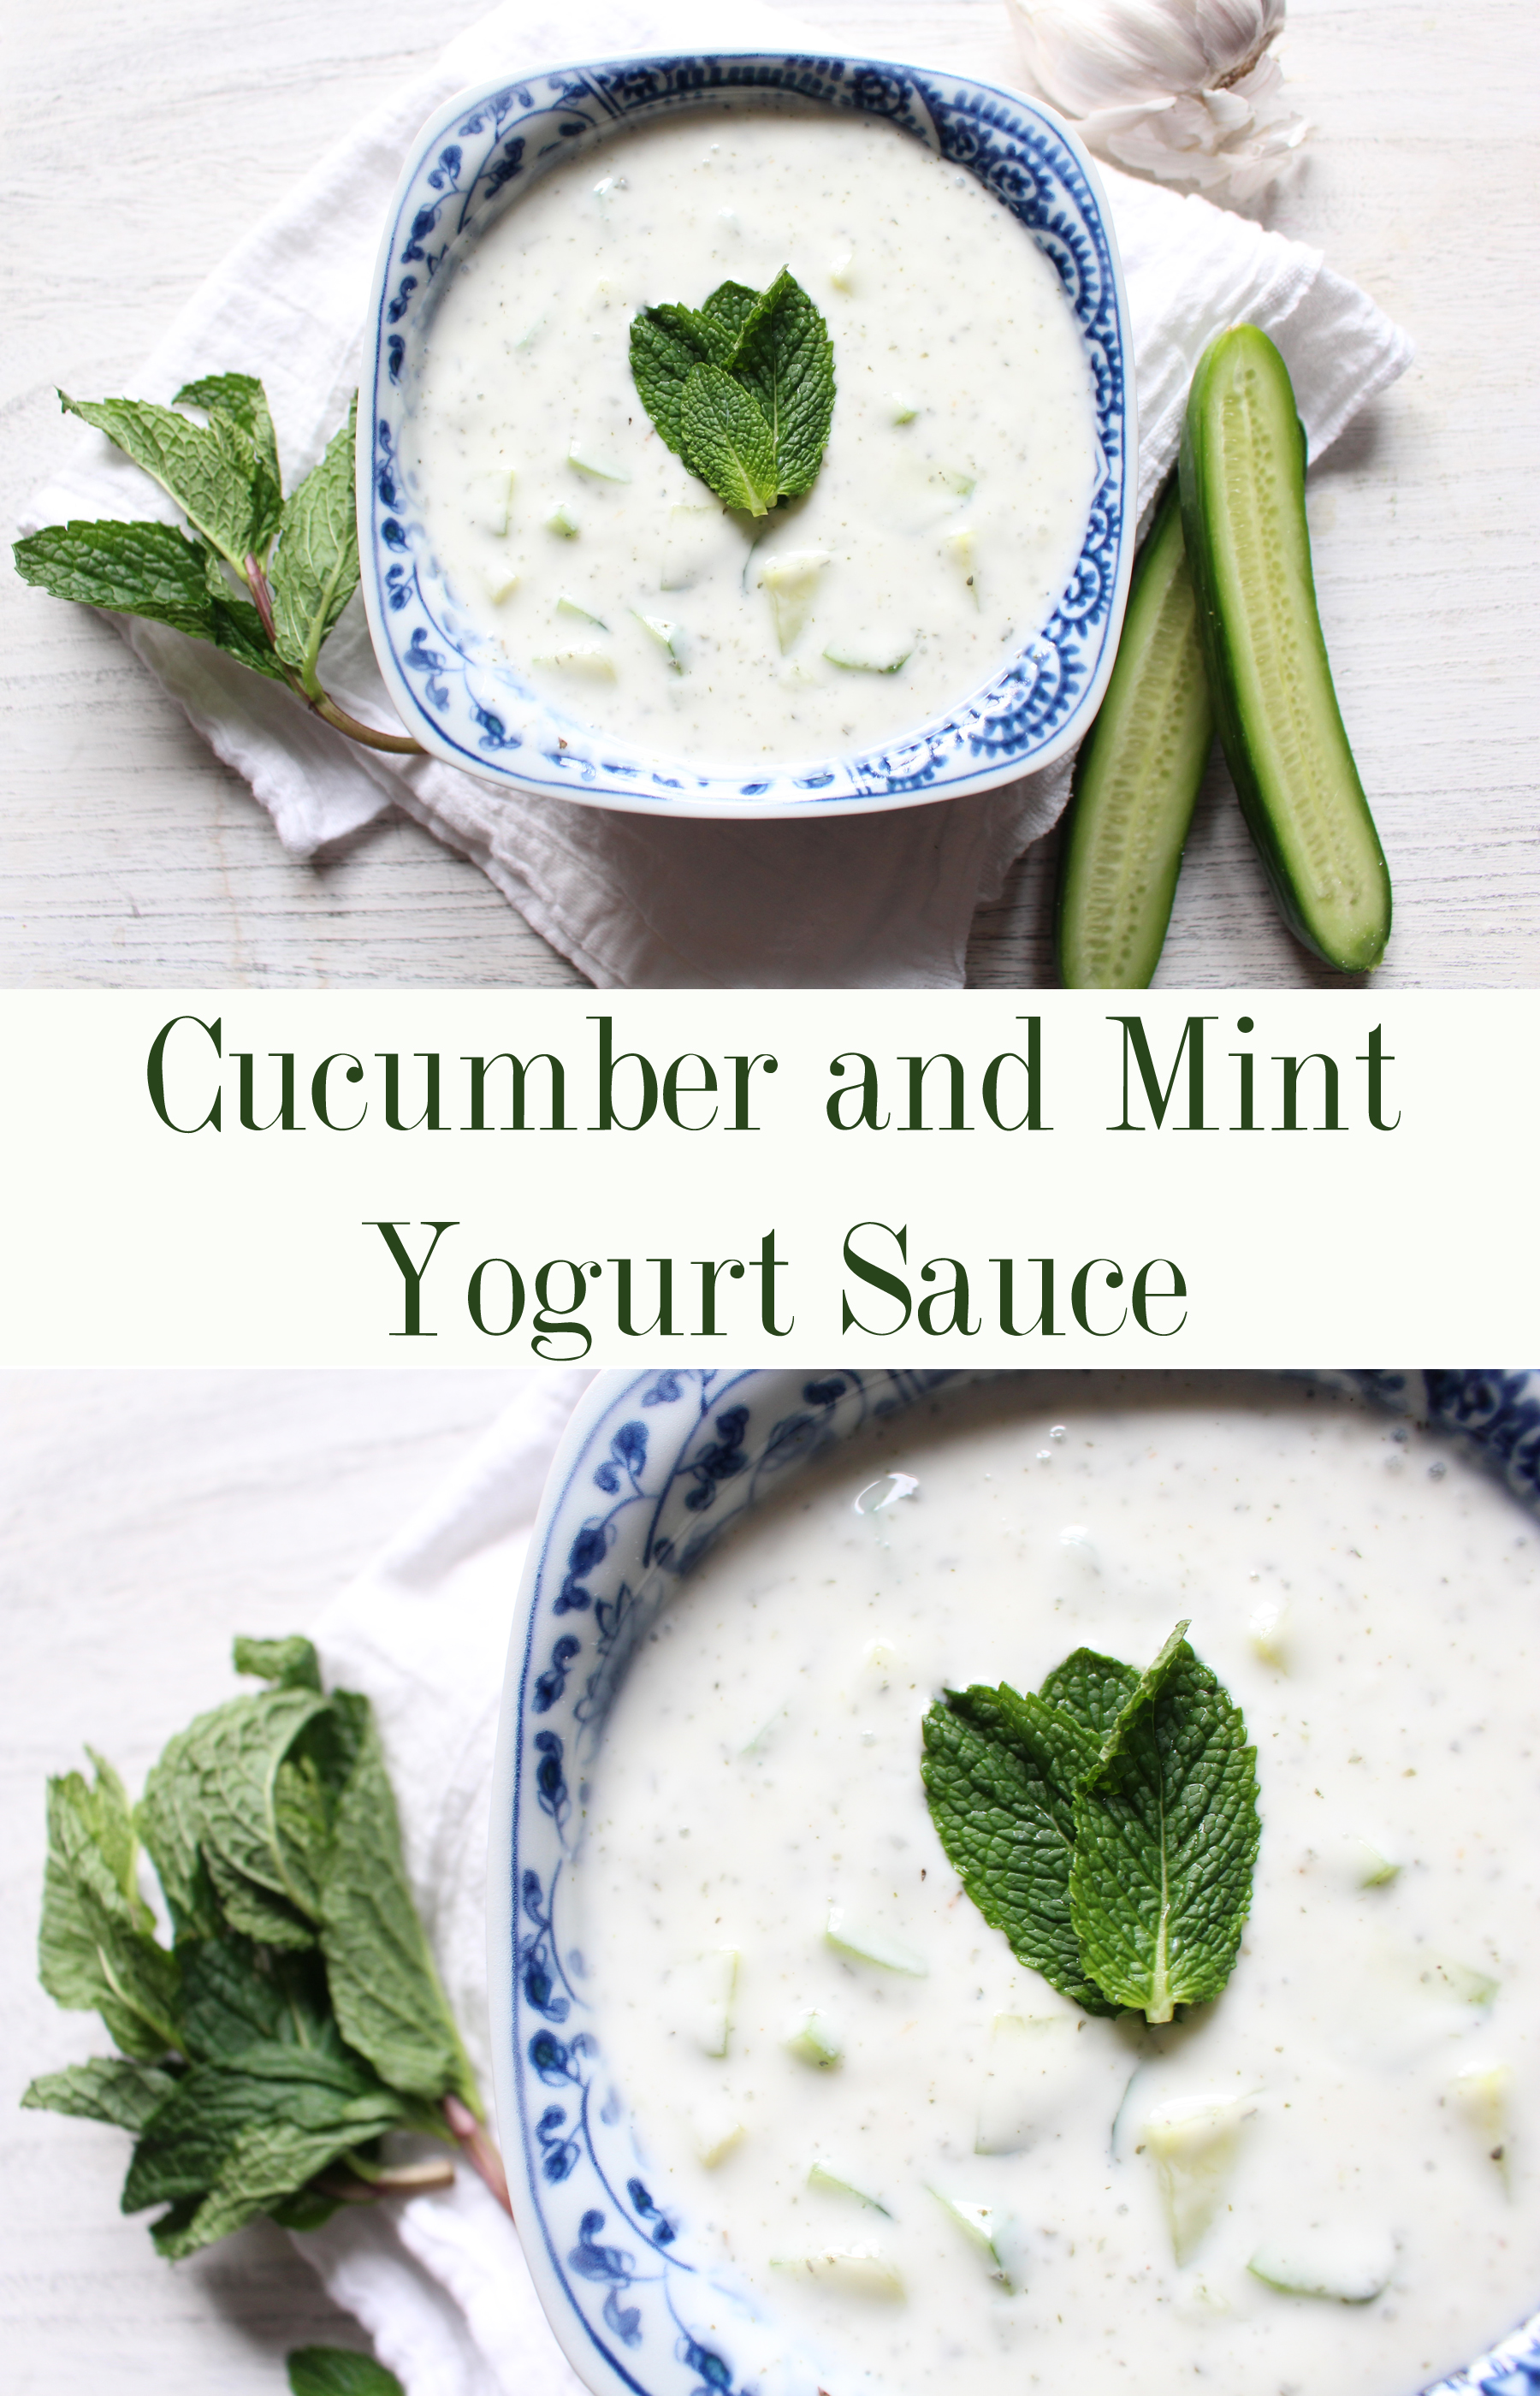 Cool and refreshing cucumber and mint yogurt sauce. The Middle Eastern version of tzatziki, this sauce is great on grilled veggies, meat, or fish or on lentils - or by itself!